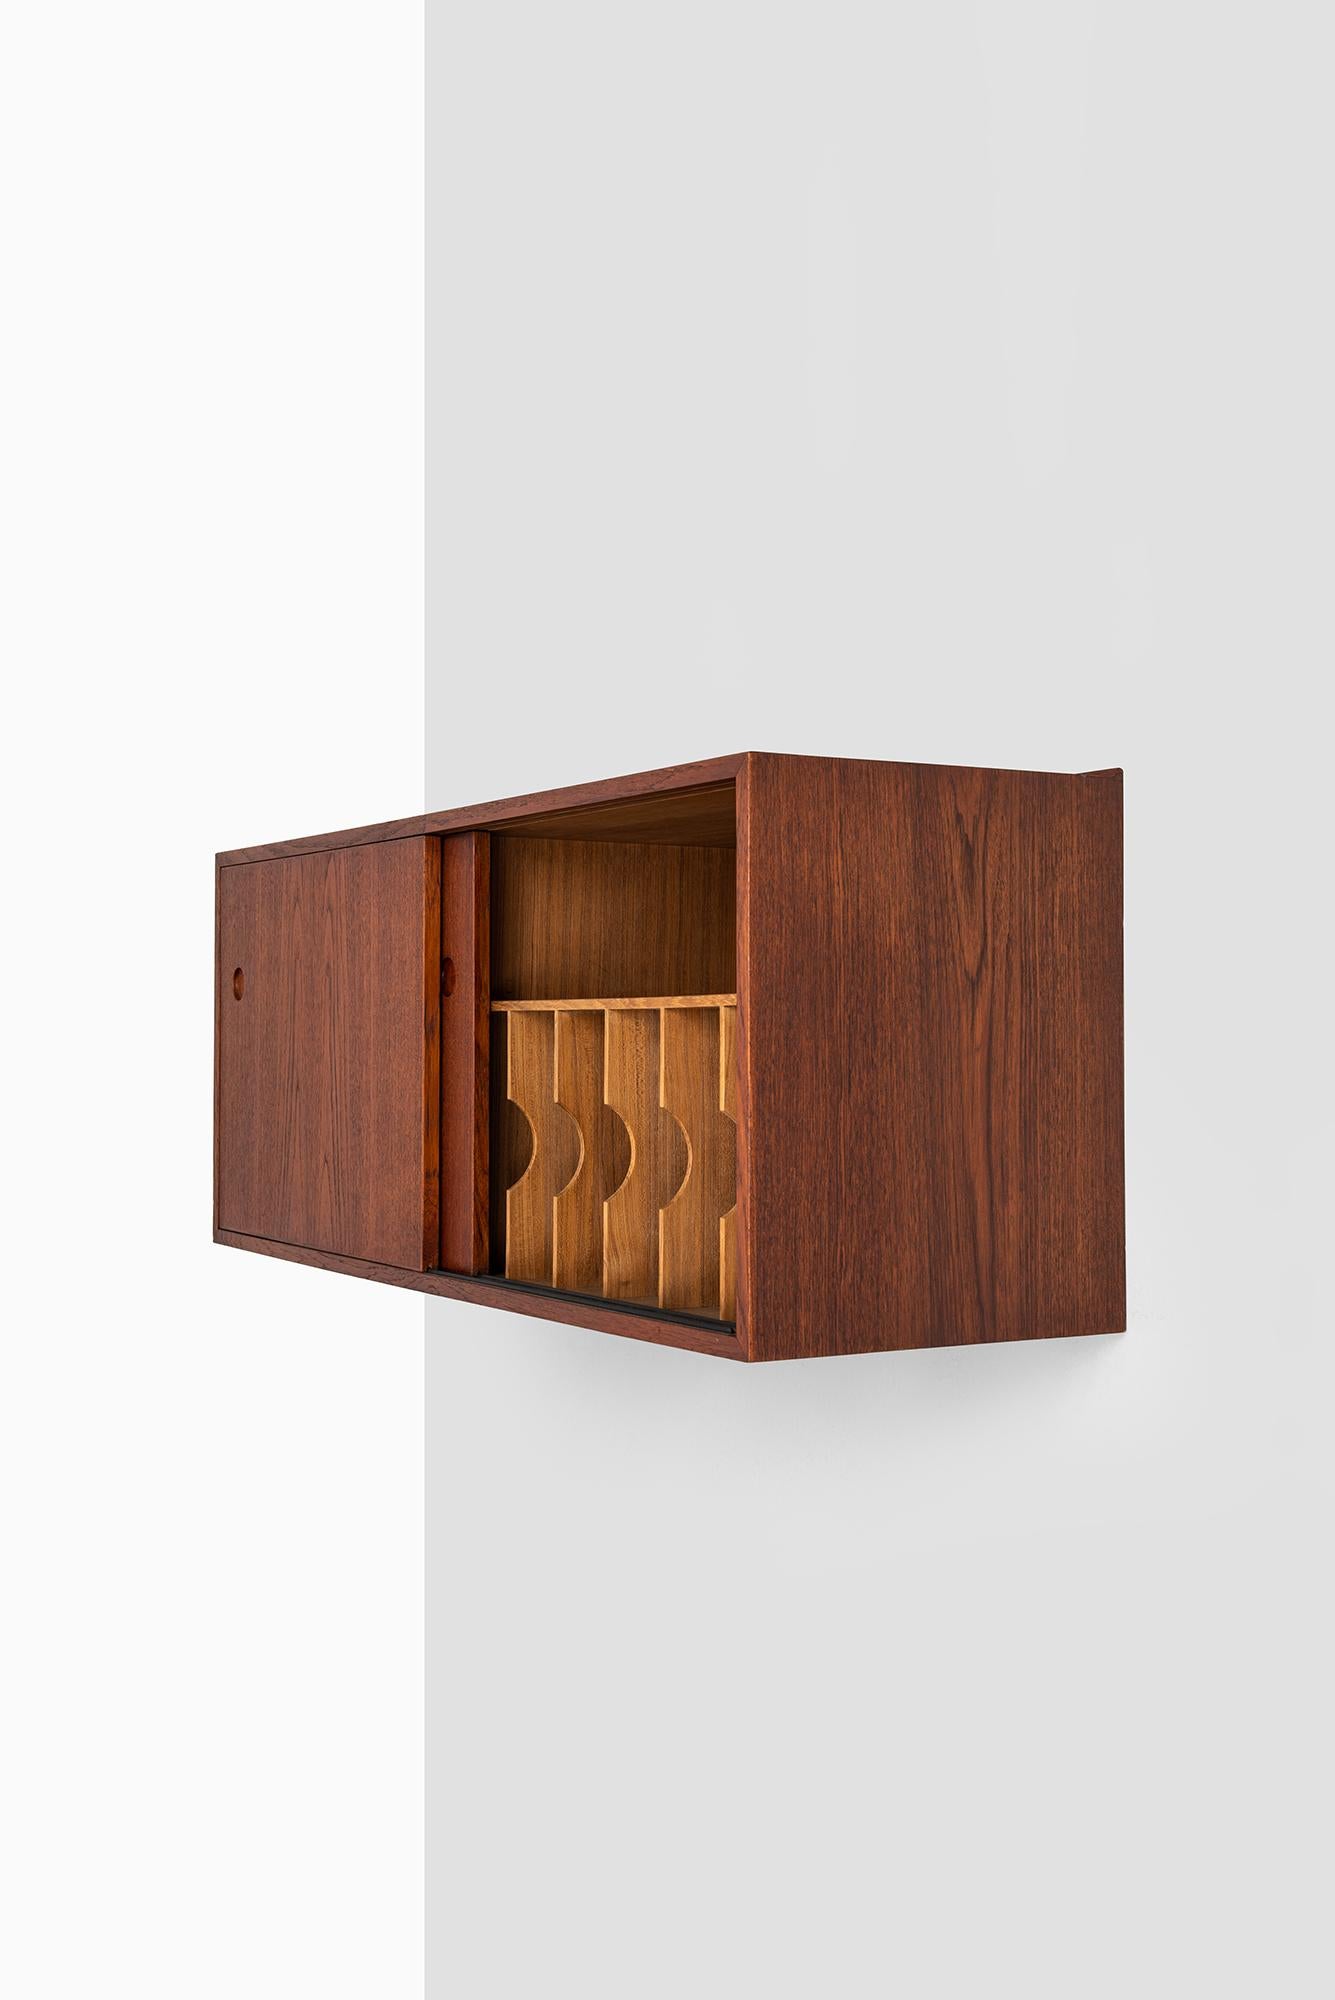 Rare wall-mounted sideboard designed by Hans Wegner. Produced by cabinetmaker Johannes Hansen in Denmark. Built in record player and storage compartments.